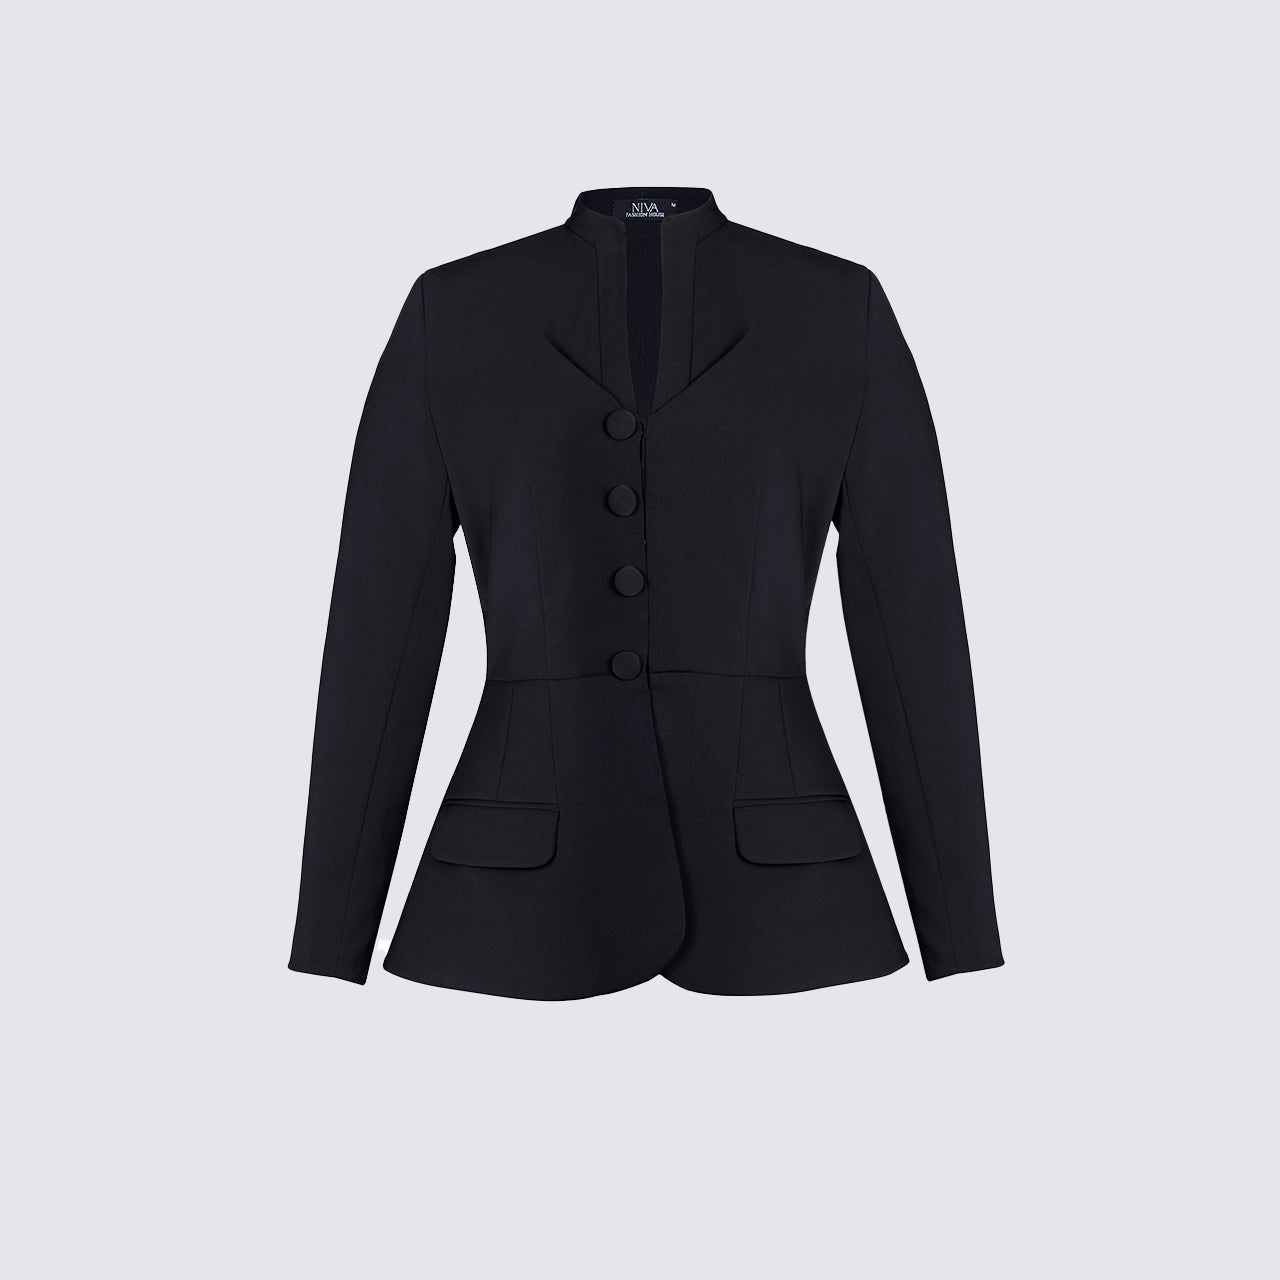 CENTRE PLEATED JACKET